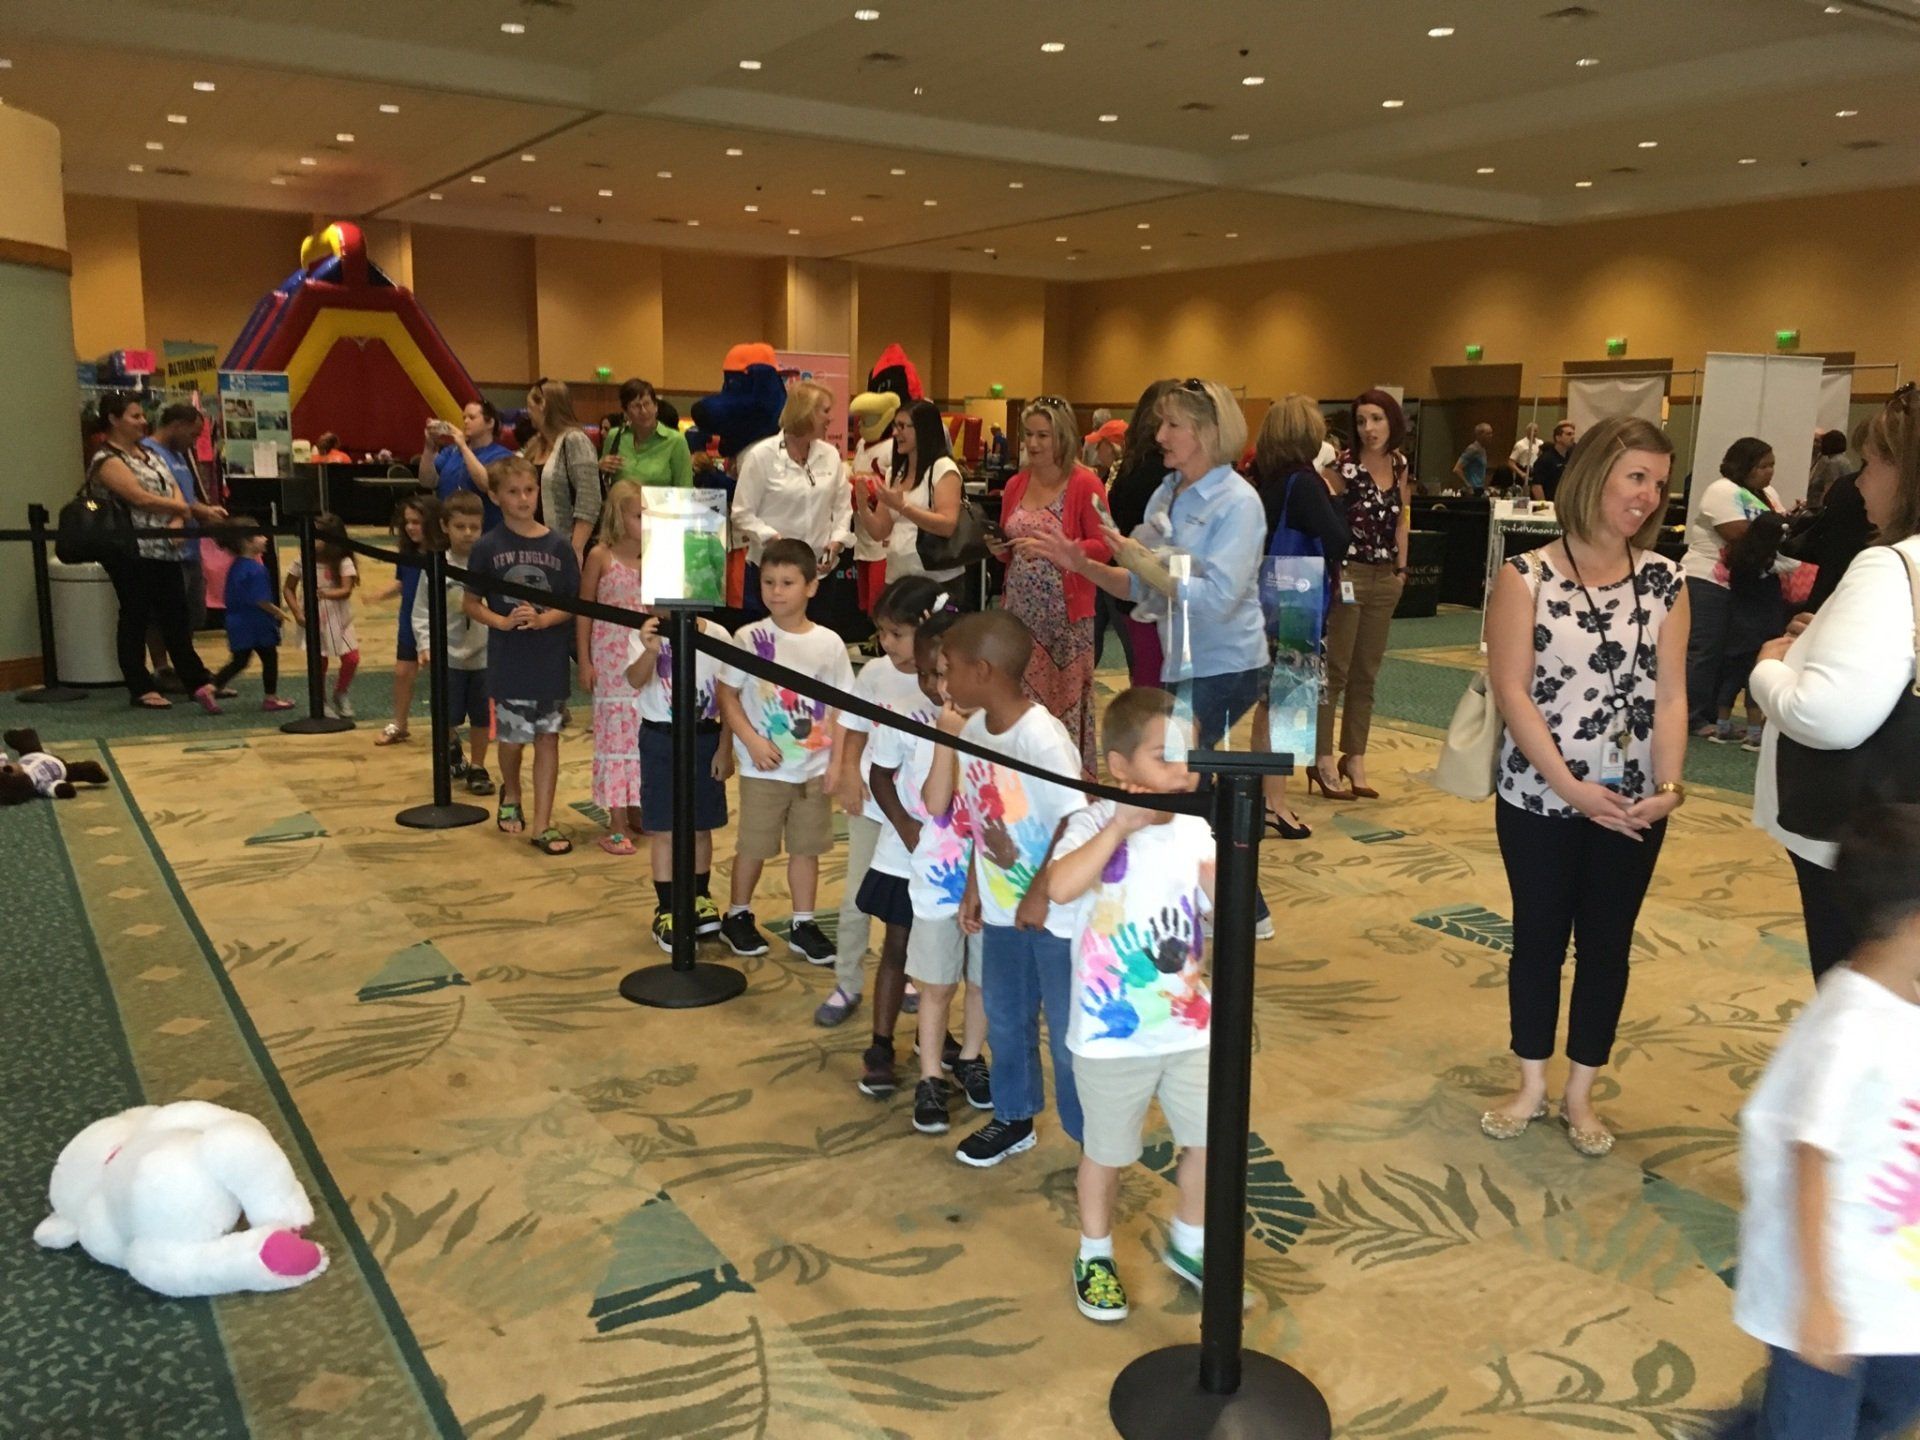 Children lining up to donate their new stuffed teddy bear to the Buddy Bear® bin